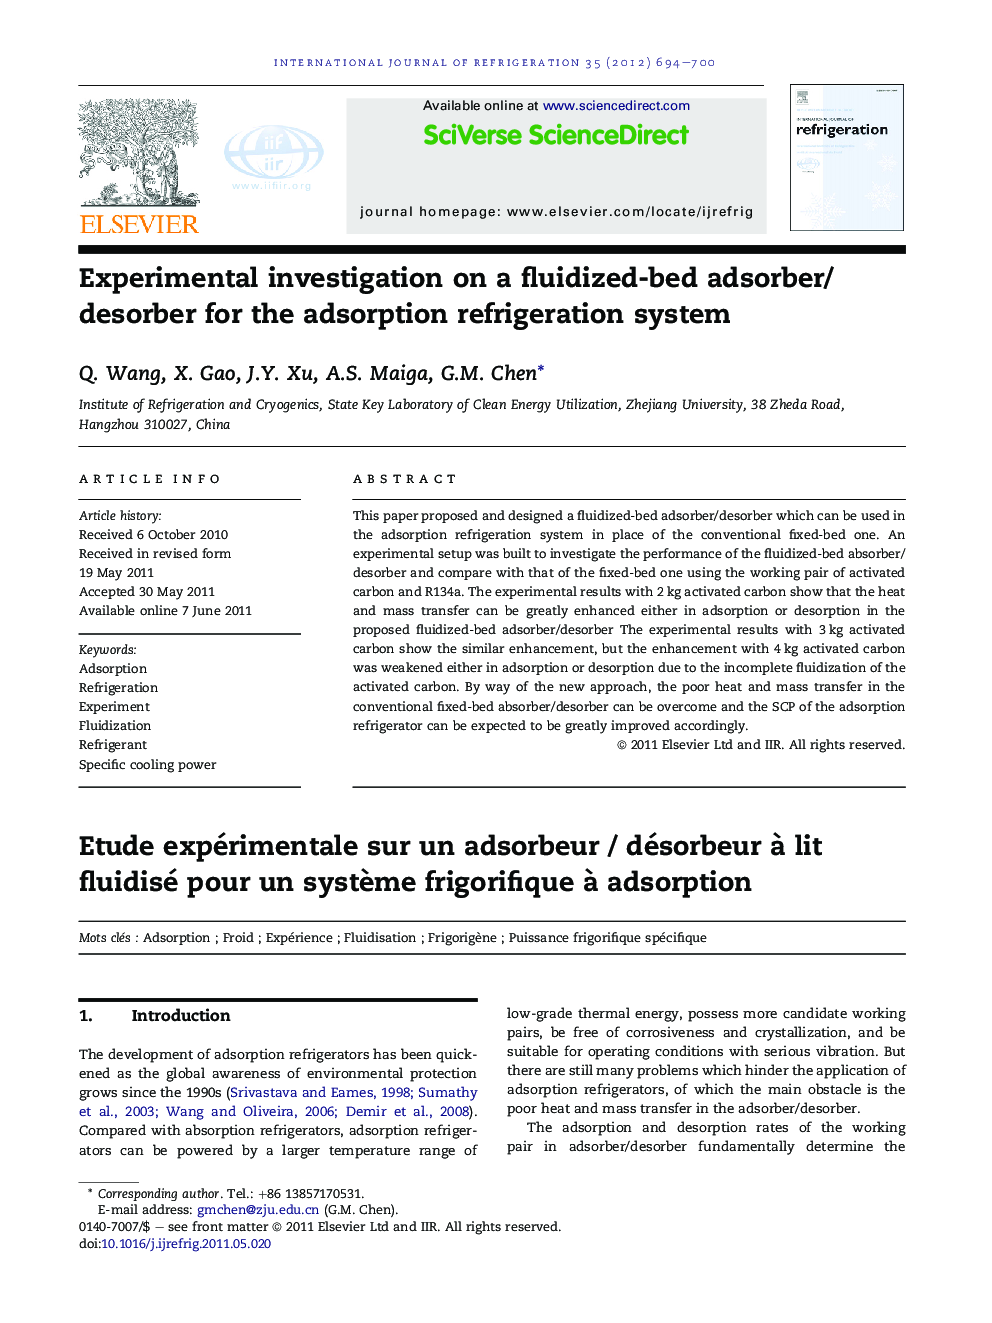 Experimental investigation on a fluidized-bed adsorber/desorber for the adsorption refrigeration system